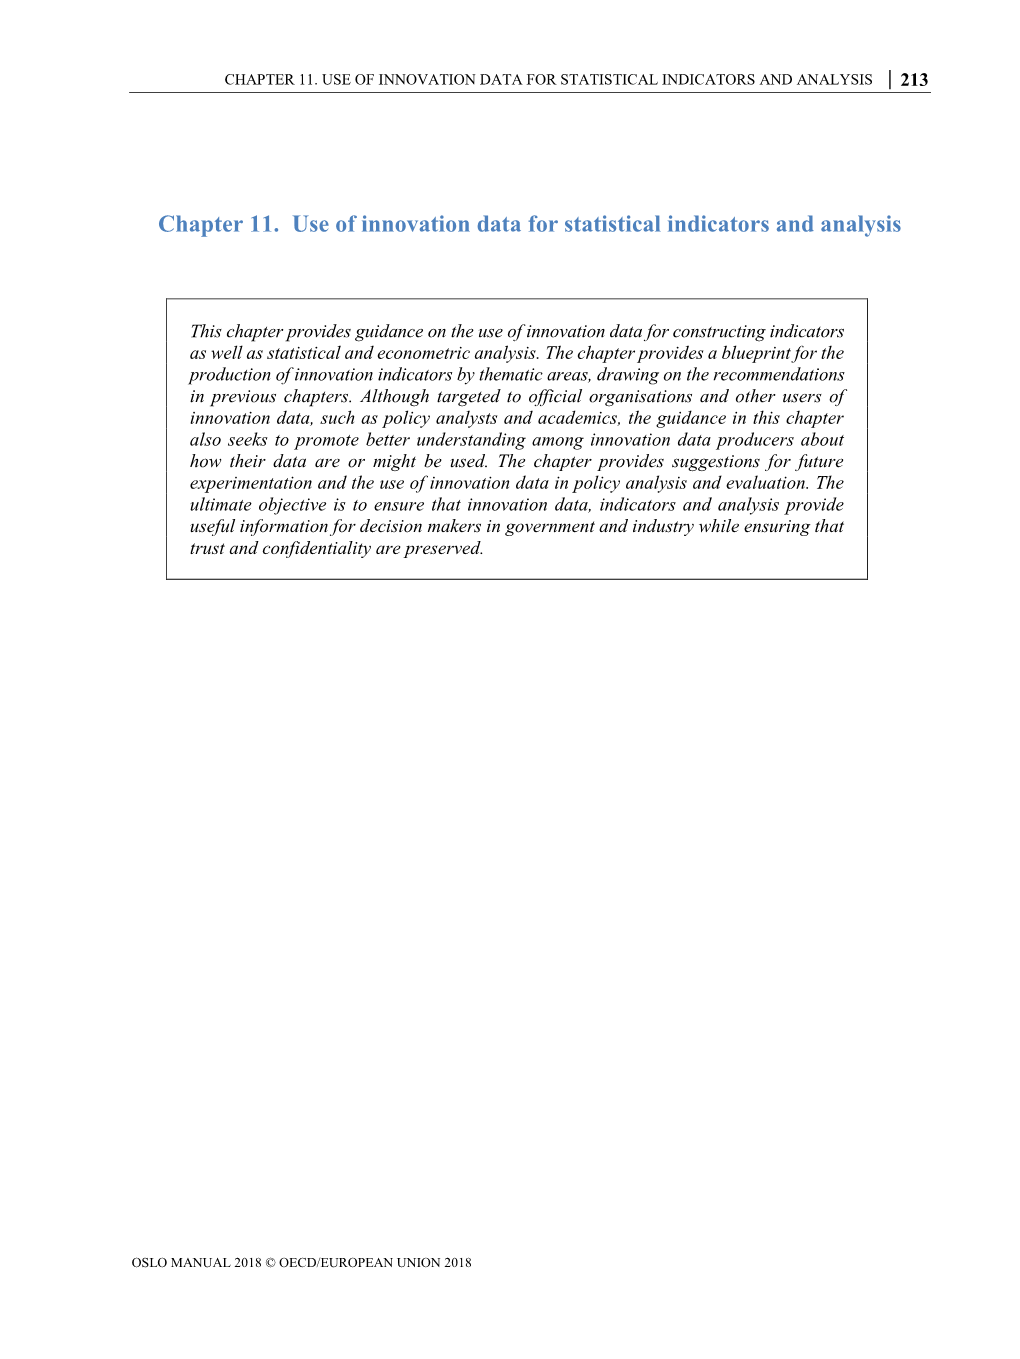 Chapter 11. Use of Innovation Data for Statistical Indicators and Analysis │ 213